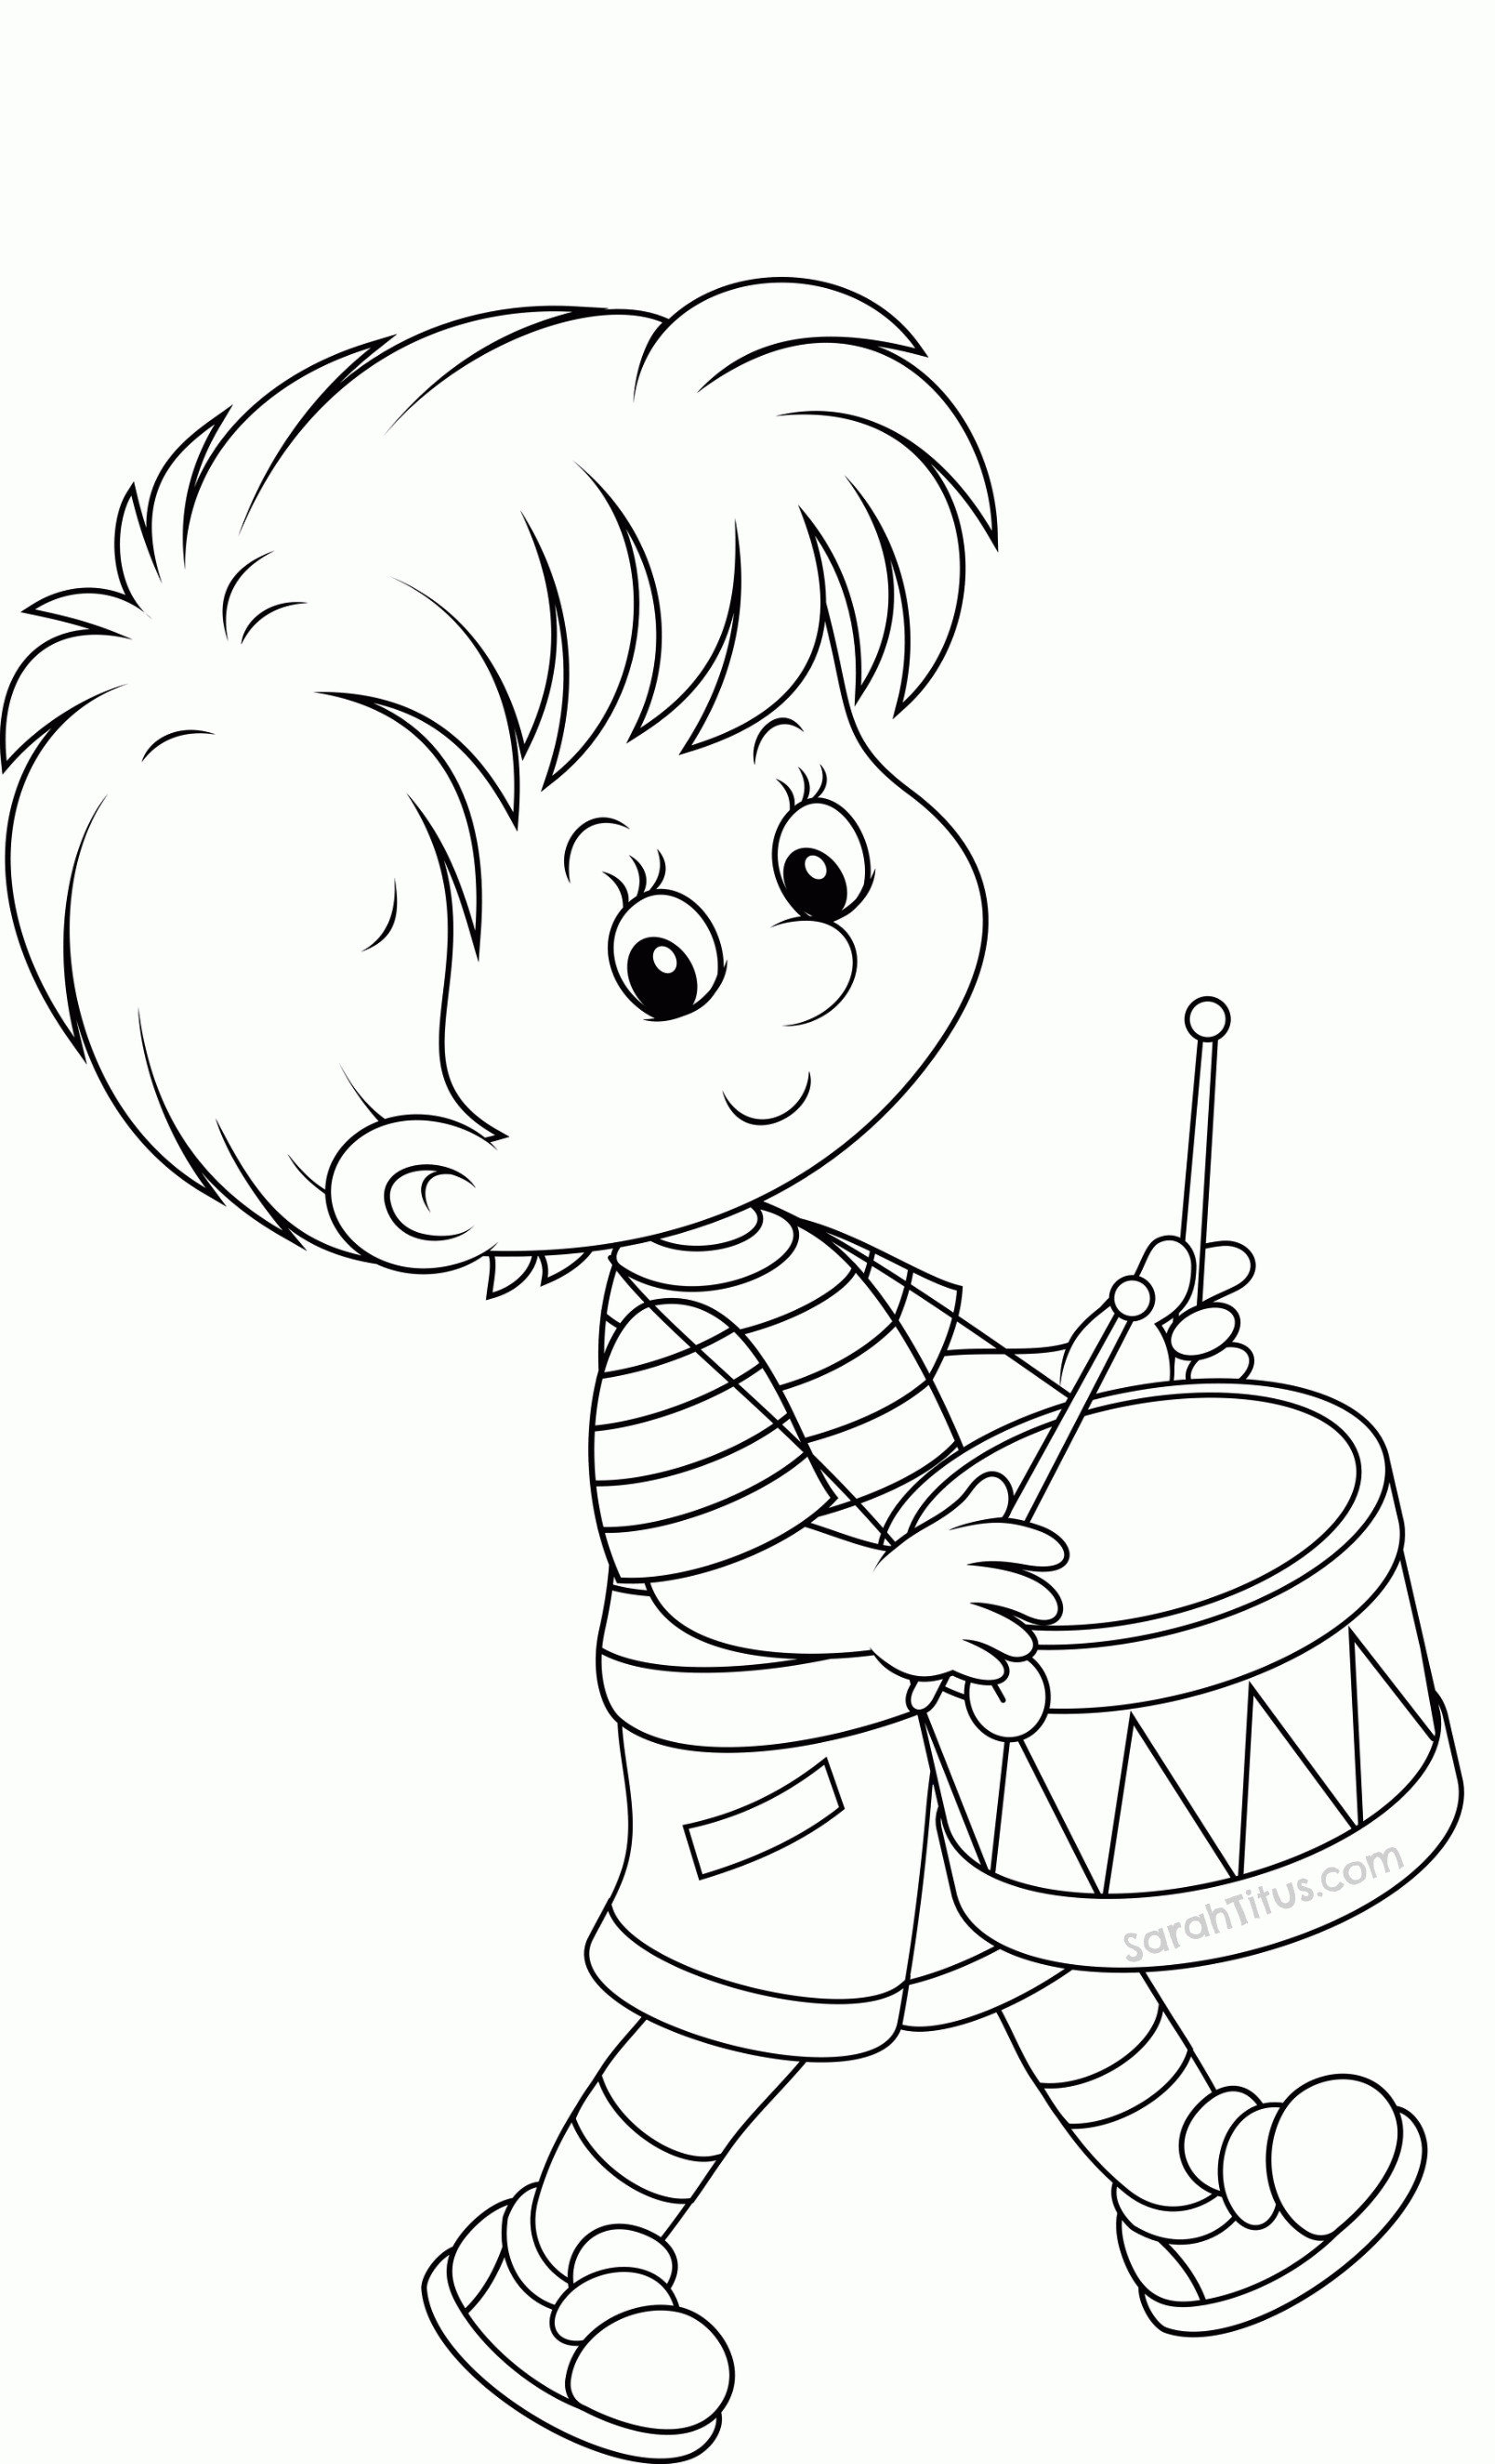 Boys Kids Coloring Pages
 A Coloring Page A Little Boy Coloring Home